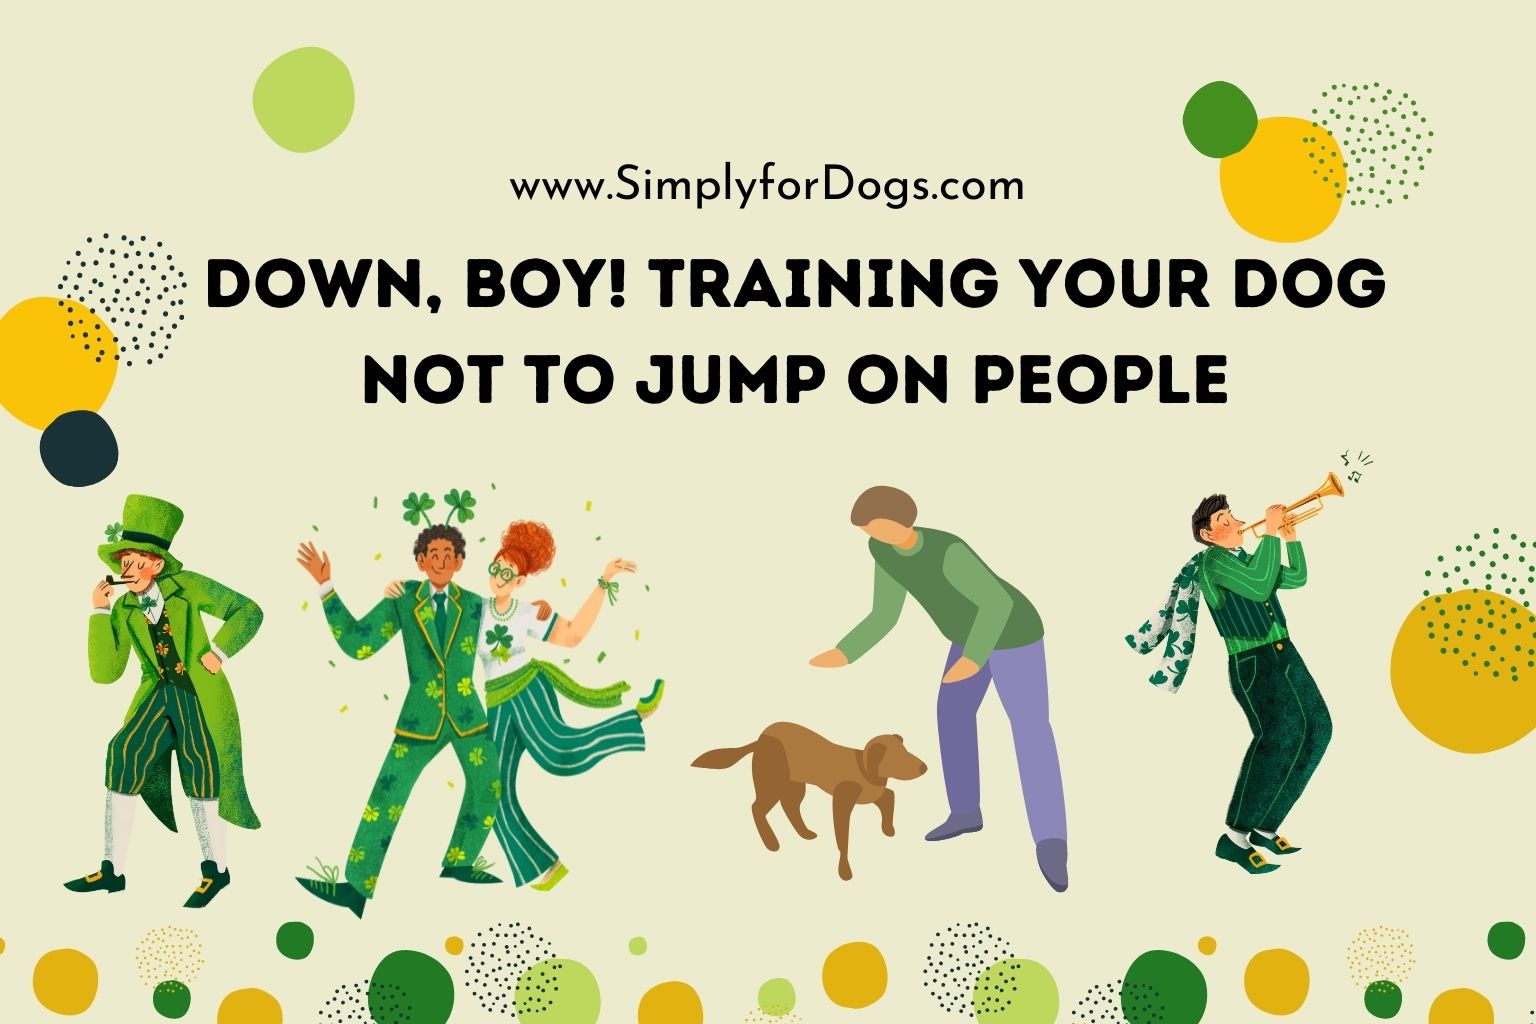 Down, Boy! Training Your Dog Not to Jump on People